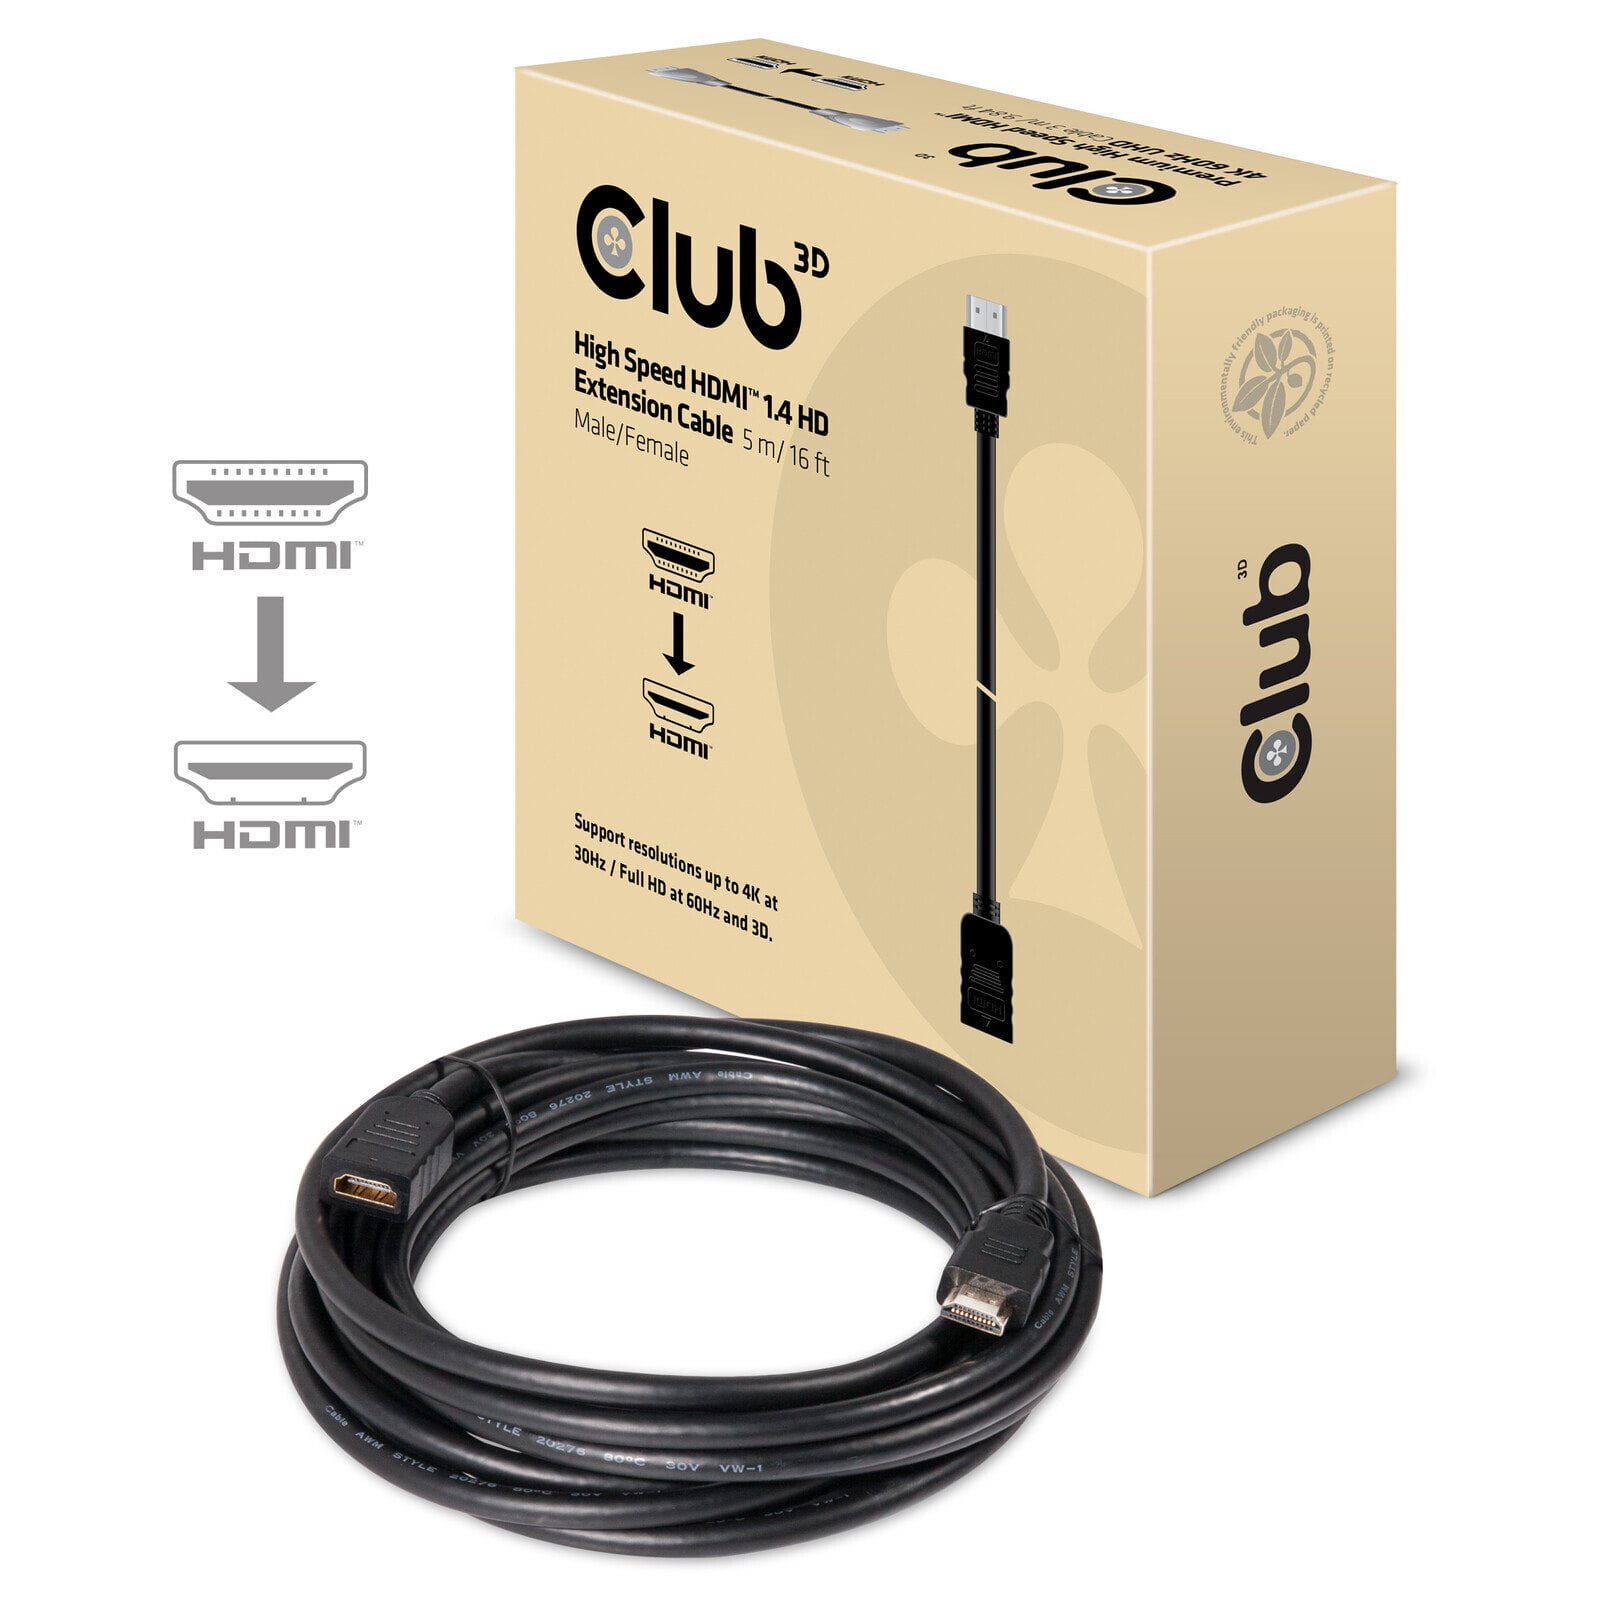 CLUB3D High Speed HDMI™ 1.4 HD Extension Cable 5m/16ft Male/Female CAC-1320